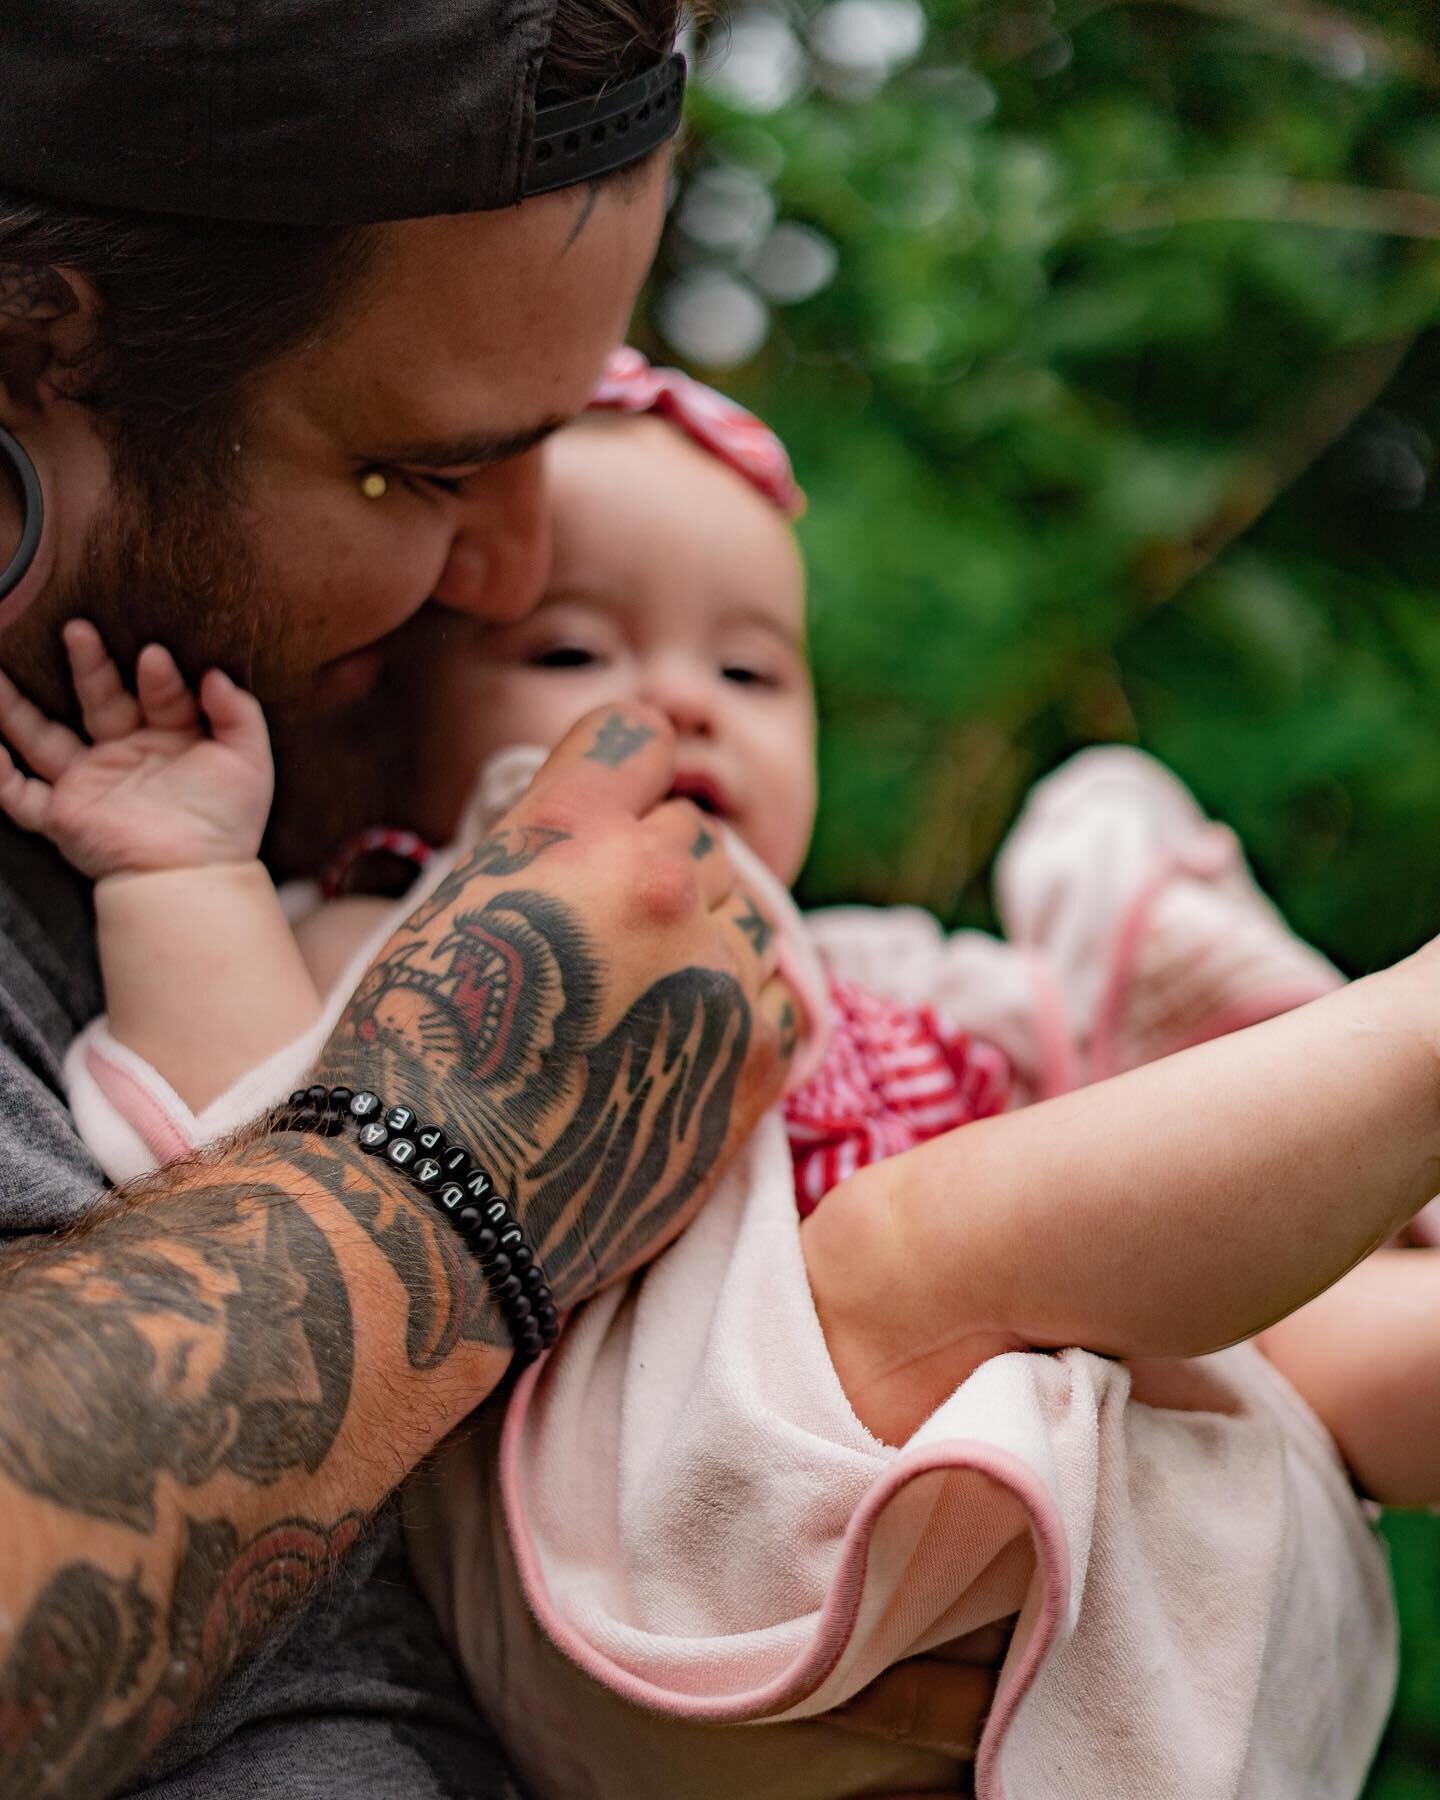 Happy Father&rsquo;s Day to all the dads out there ☺️🖤

Such precious moments captured for Rhey &amp; RJ 📸💖

Love when a couple of artists get together and make a family. Check out both of their creative work! @slay.hair.rhey @r.j.tattoo 👀👌✨

#f